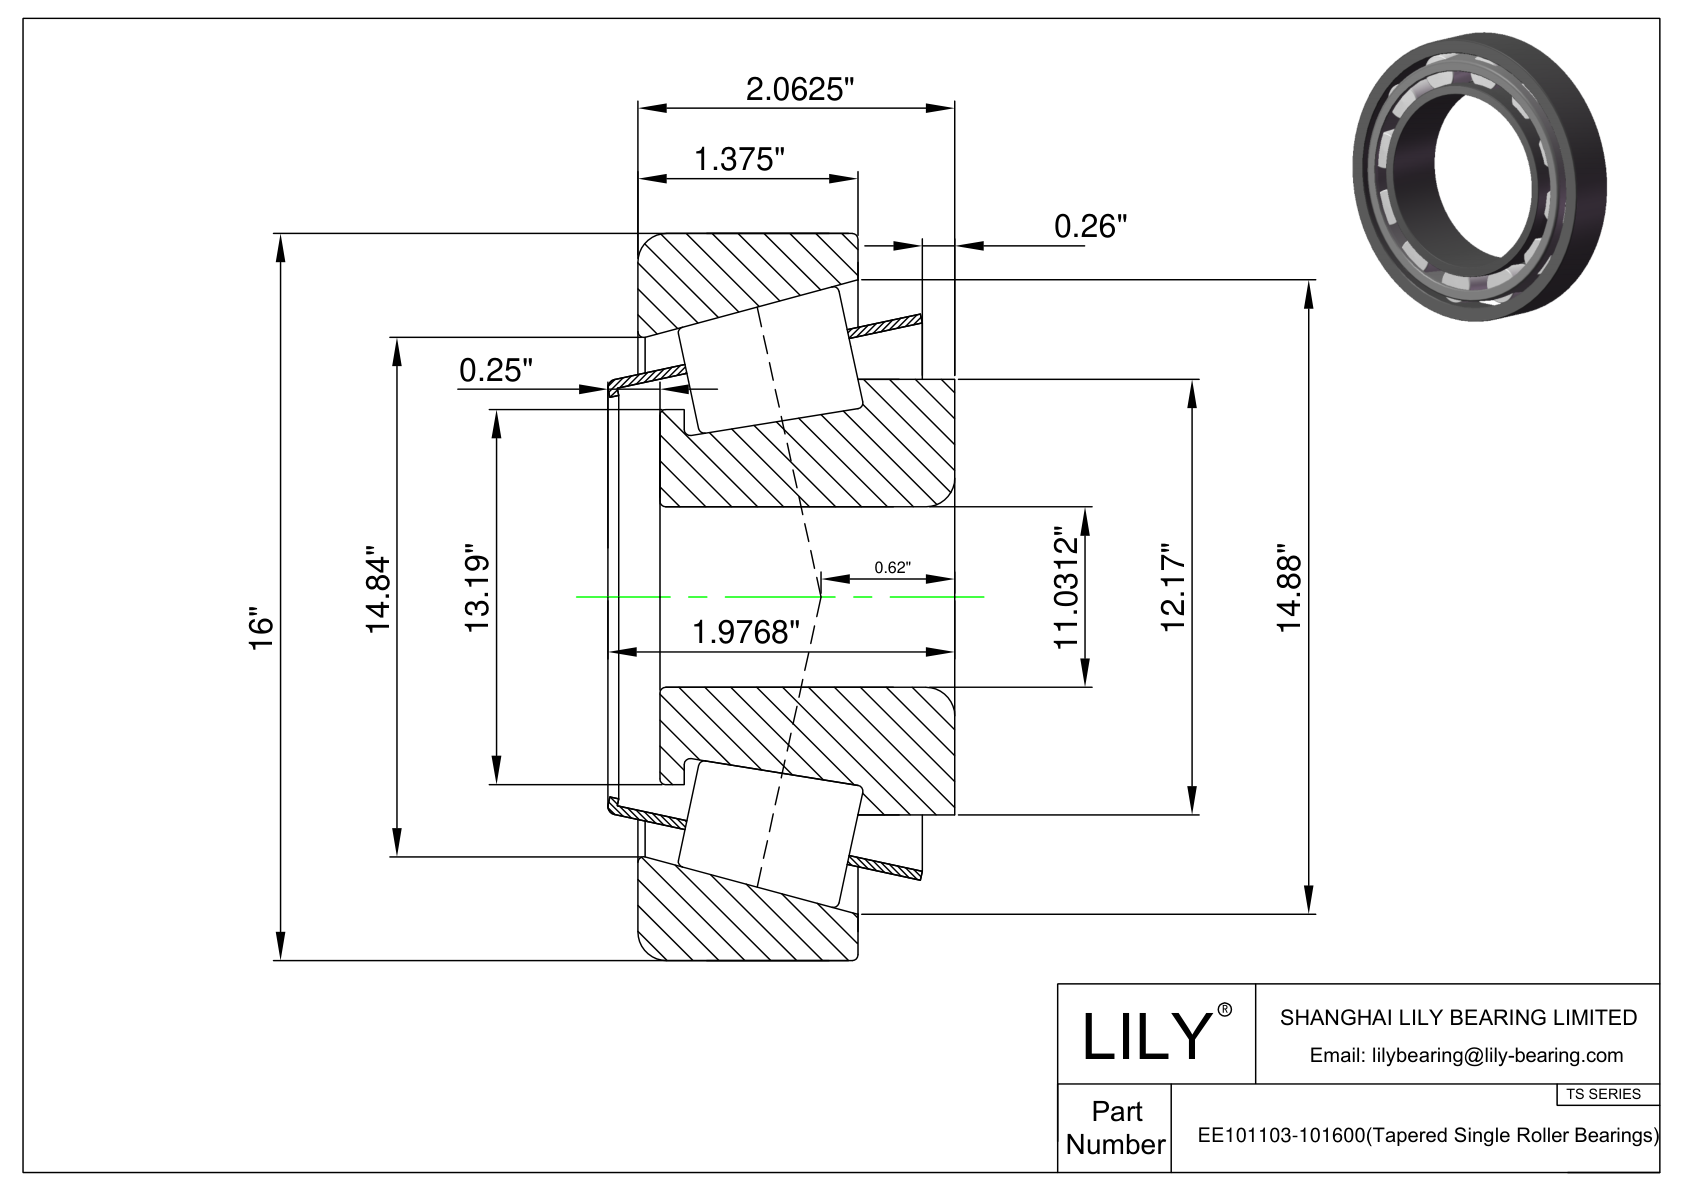 EE101103-101600 TS (Tapered Single Roller Bearings) (Imperial) cad drawing